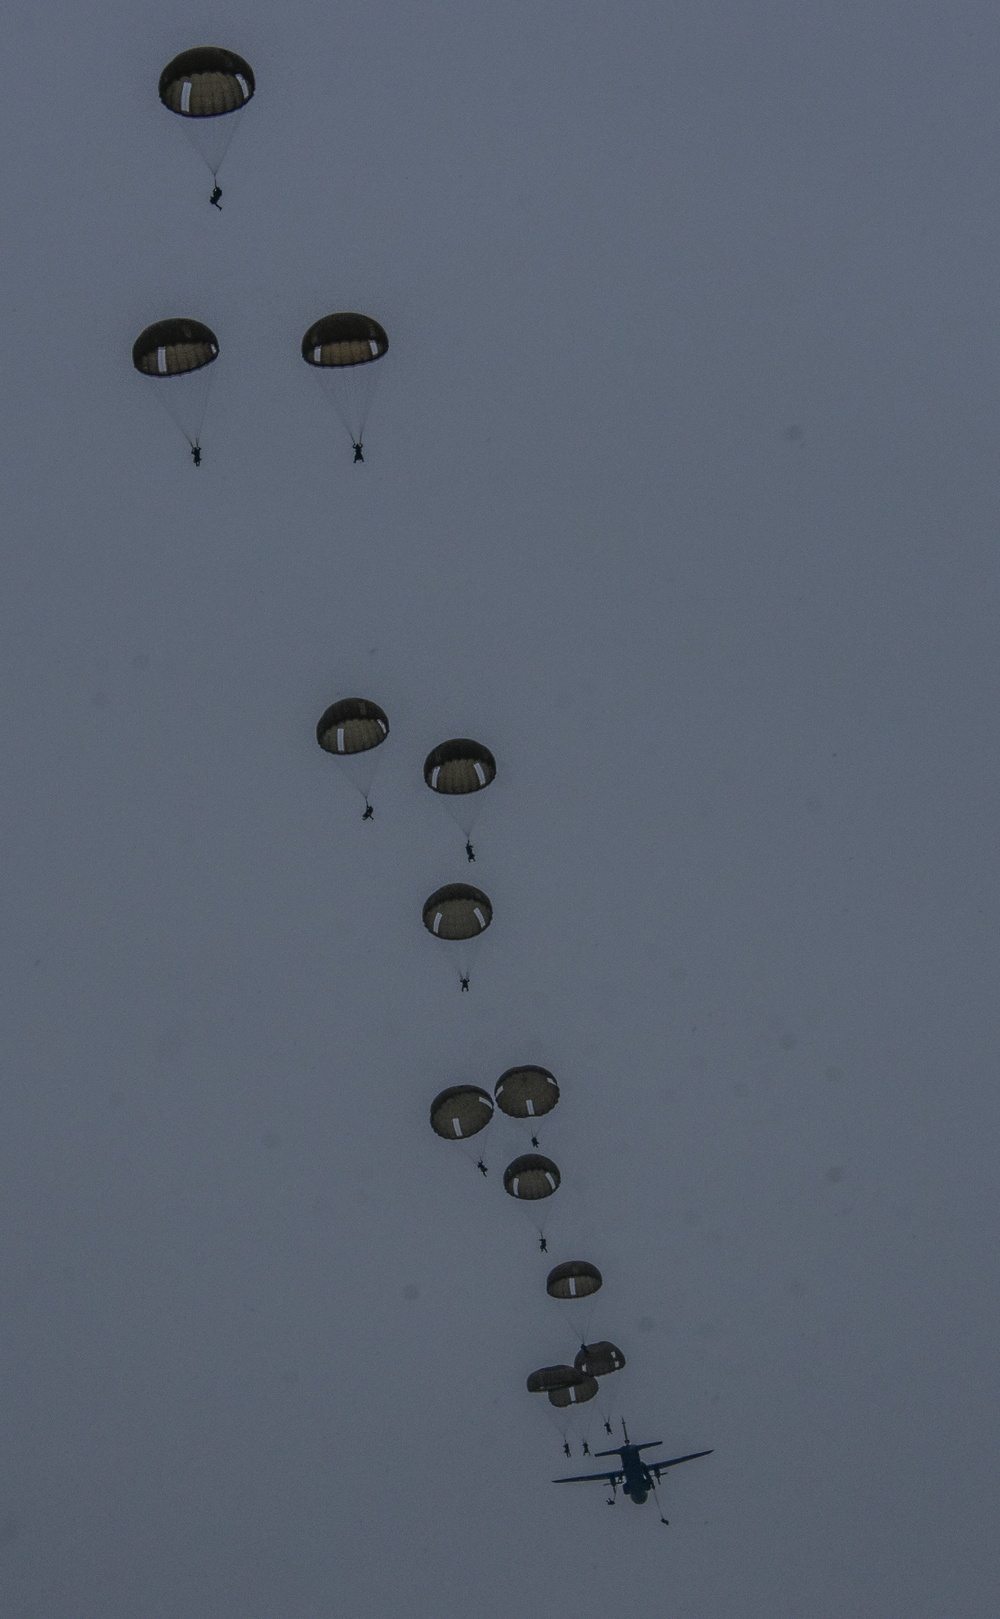 Airborne in France